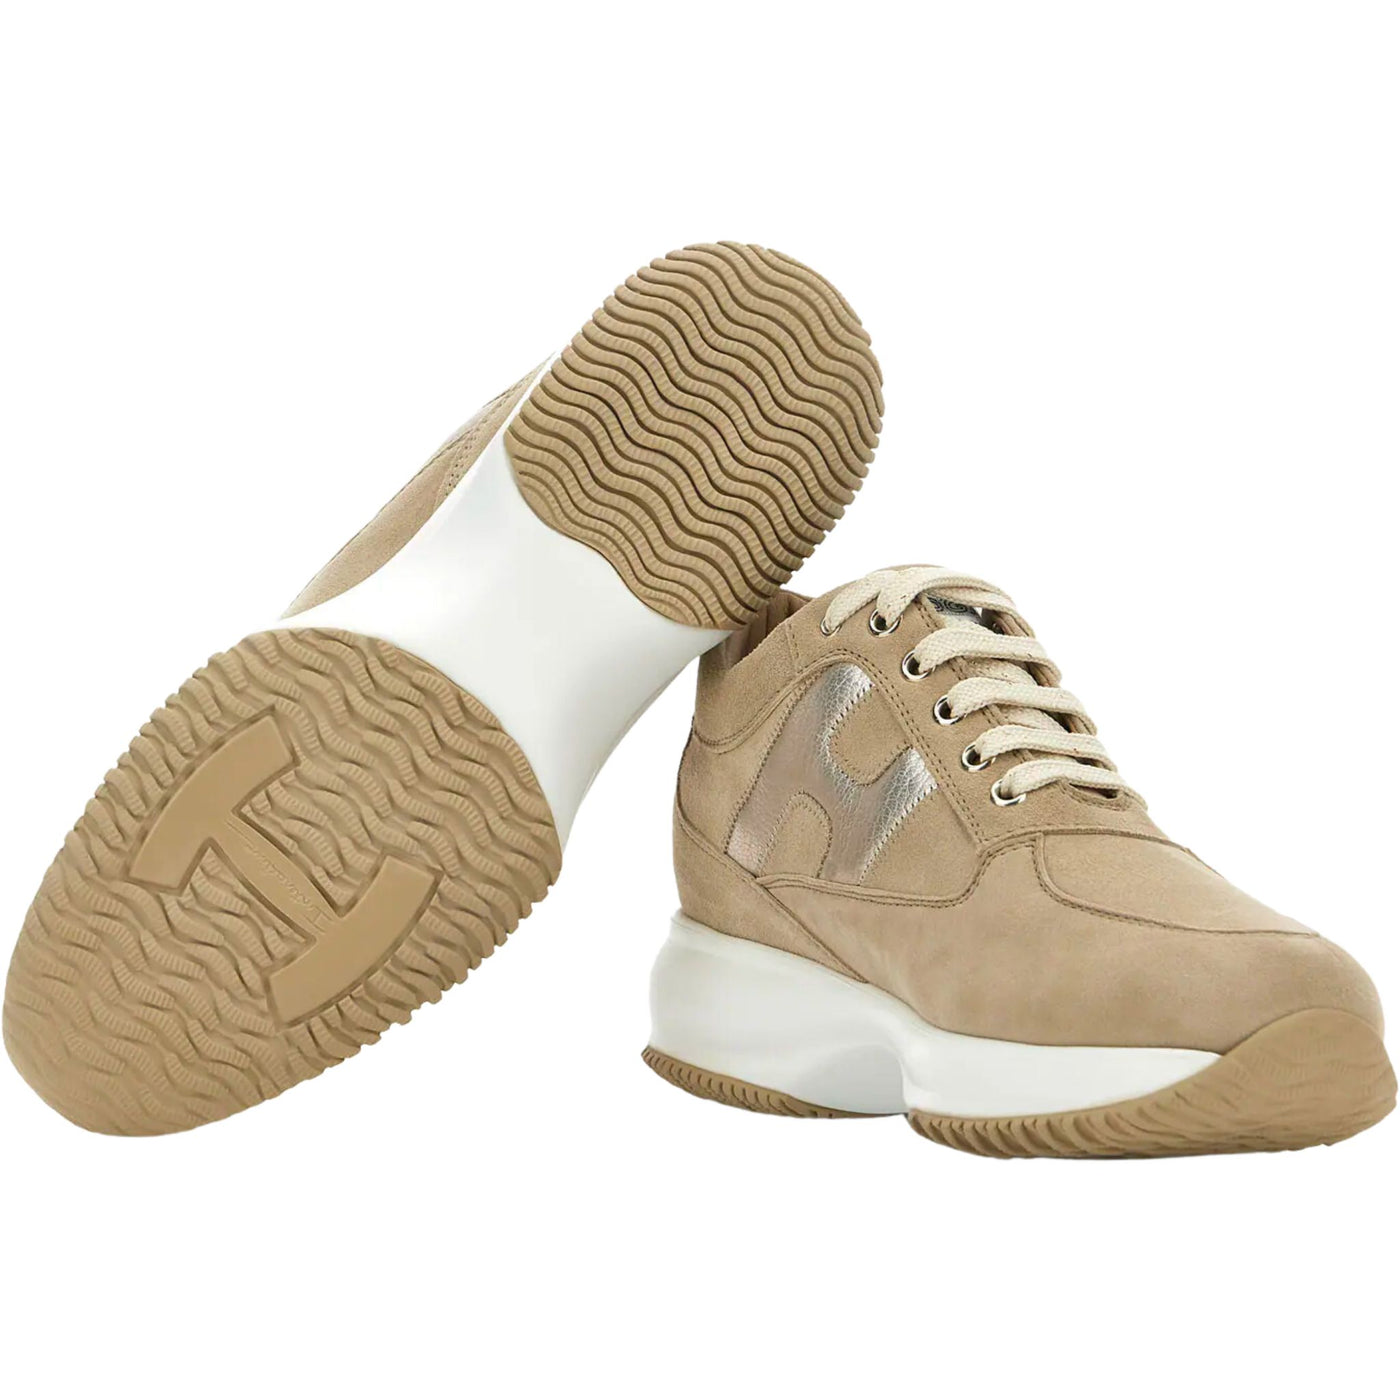 Women's suede shoe with silver logo